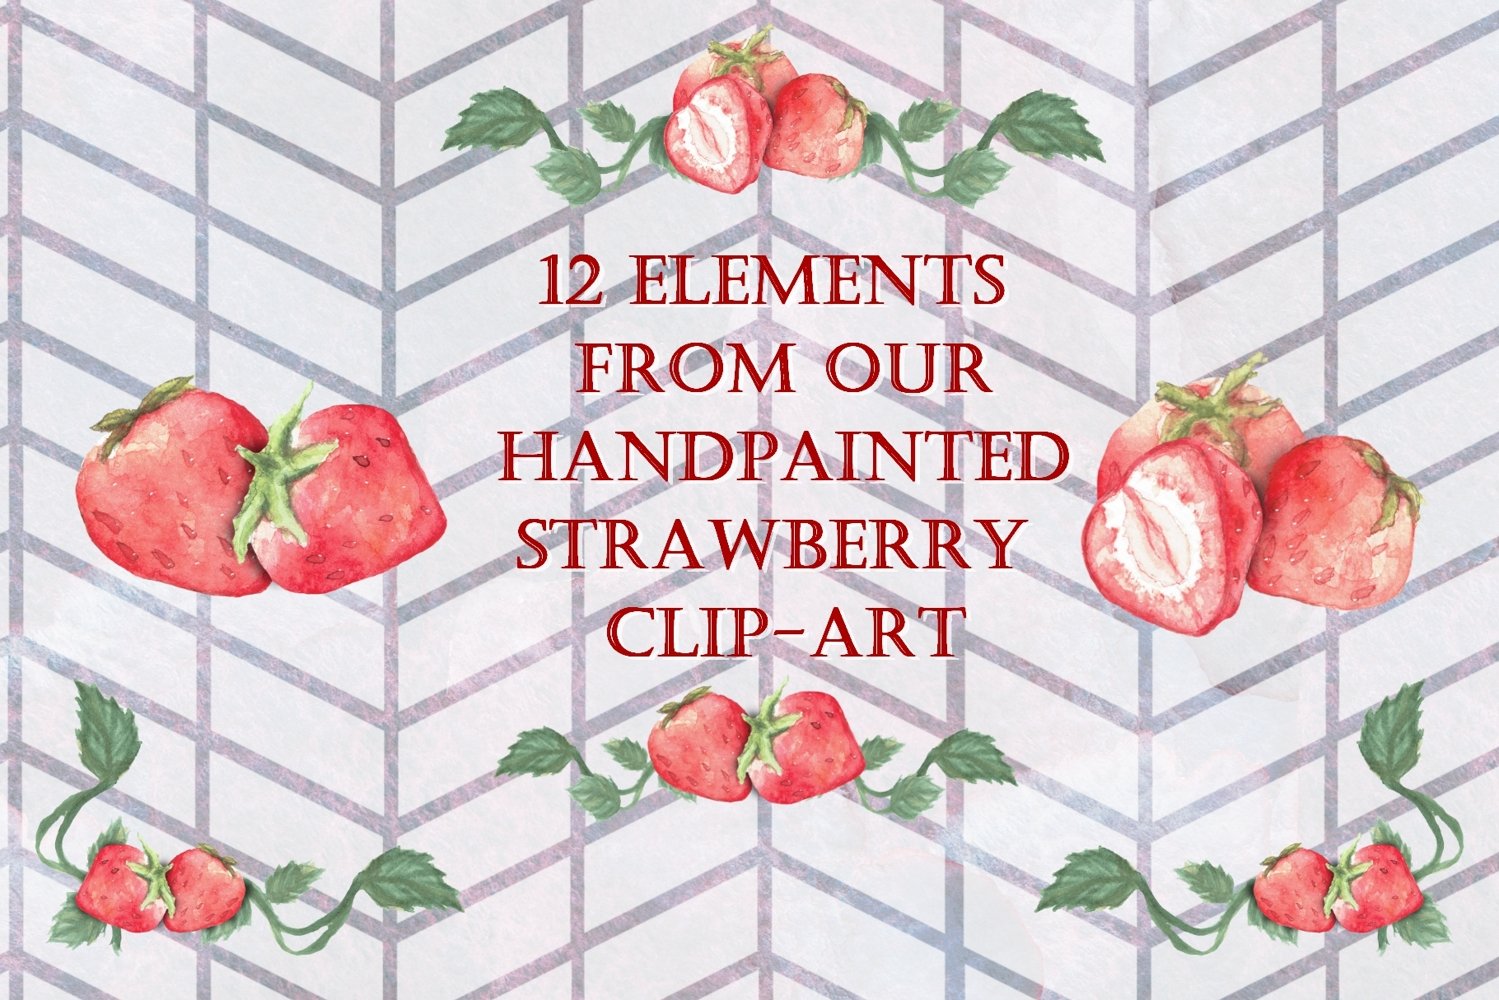 You will get 12 elements from our handprinted strawberry clipart.